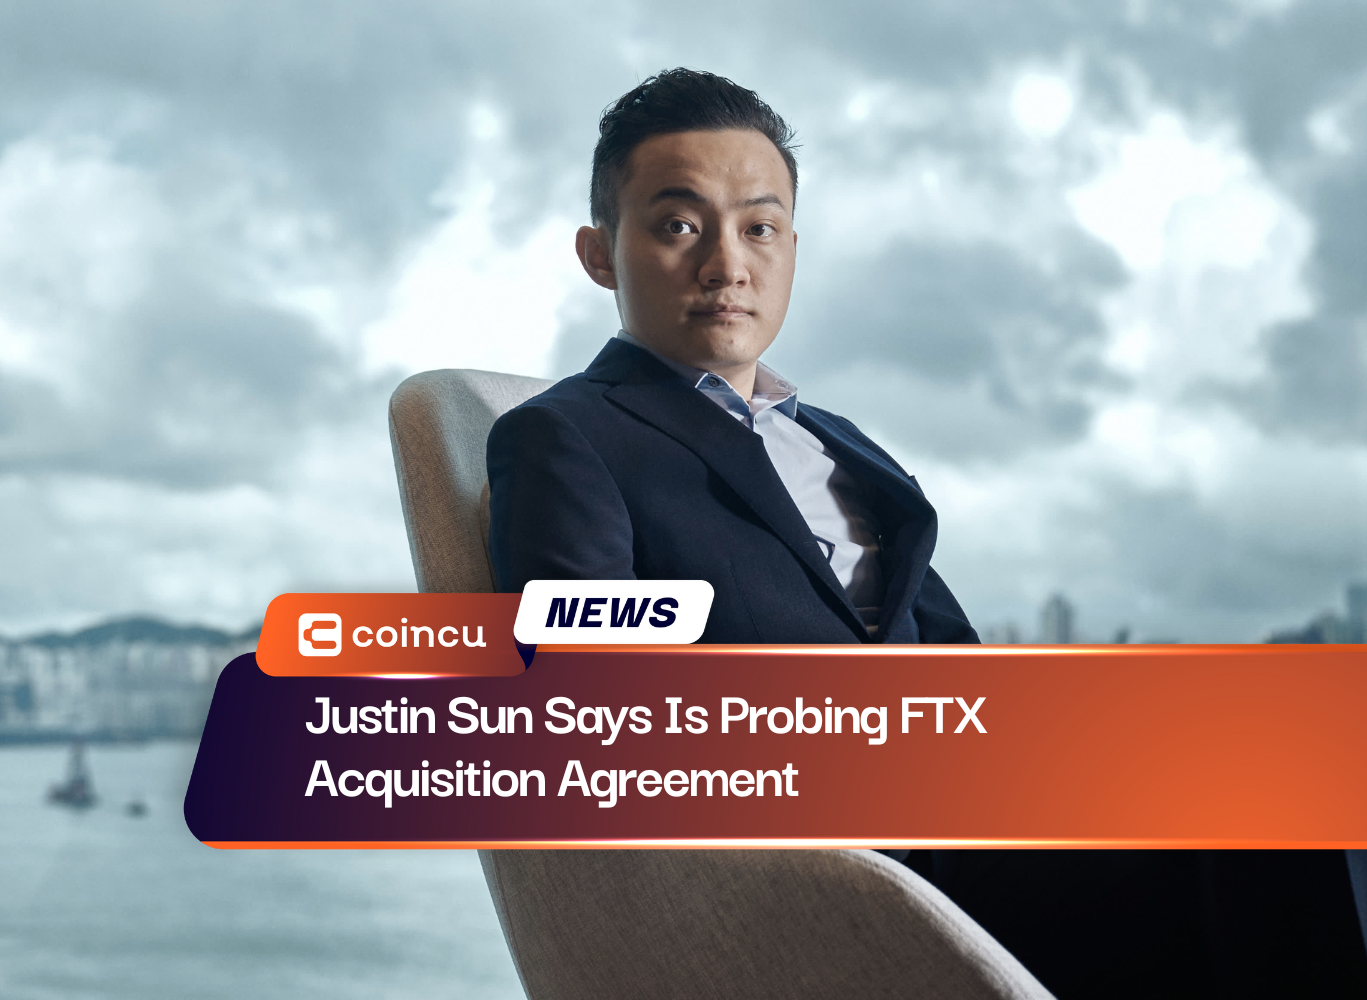 Justin Sun Says Is Probing FTX Acquisition Agreement